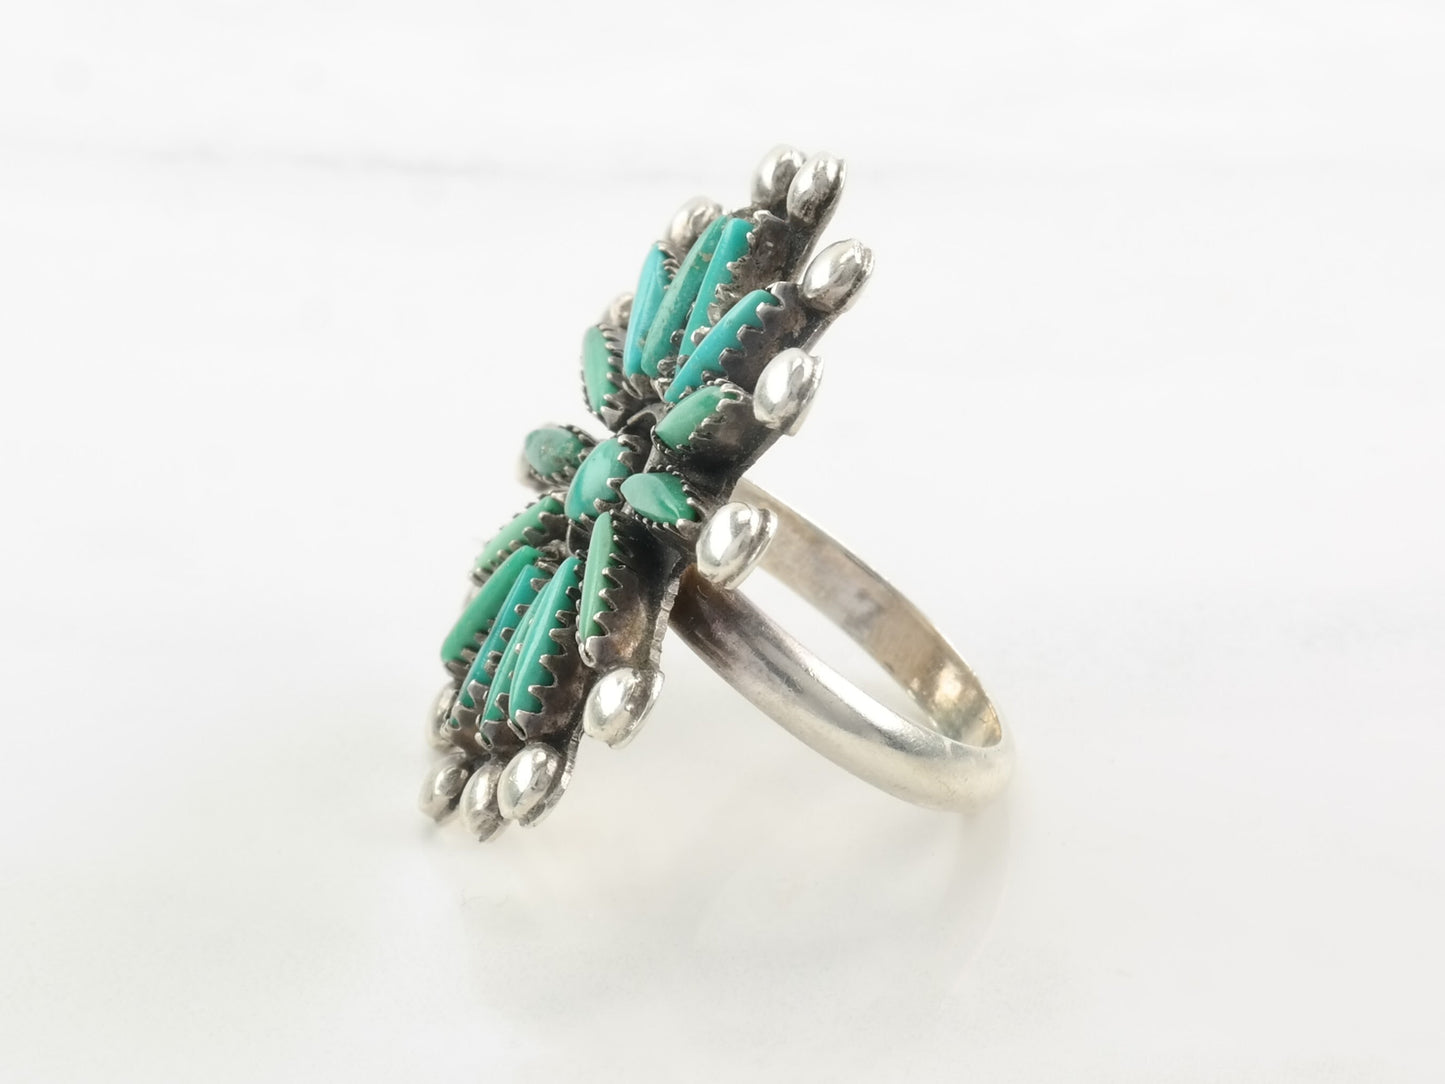 Vintage Zuni Silver Ring Turquoise Needlepoint, Floral Sterling Size 8 3/4